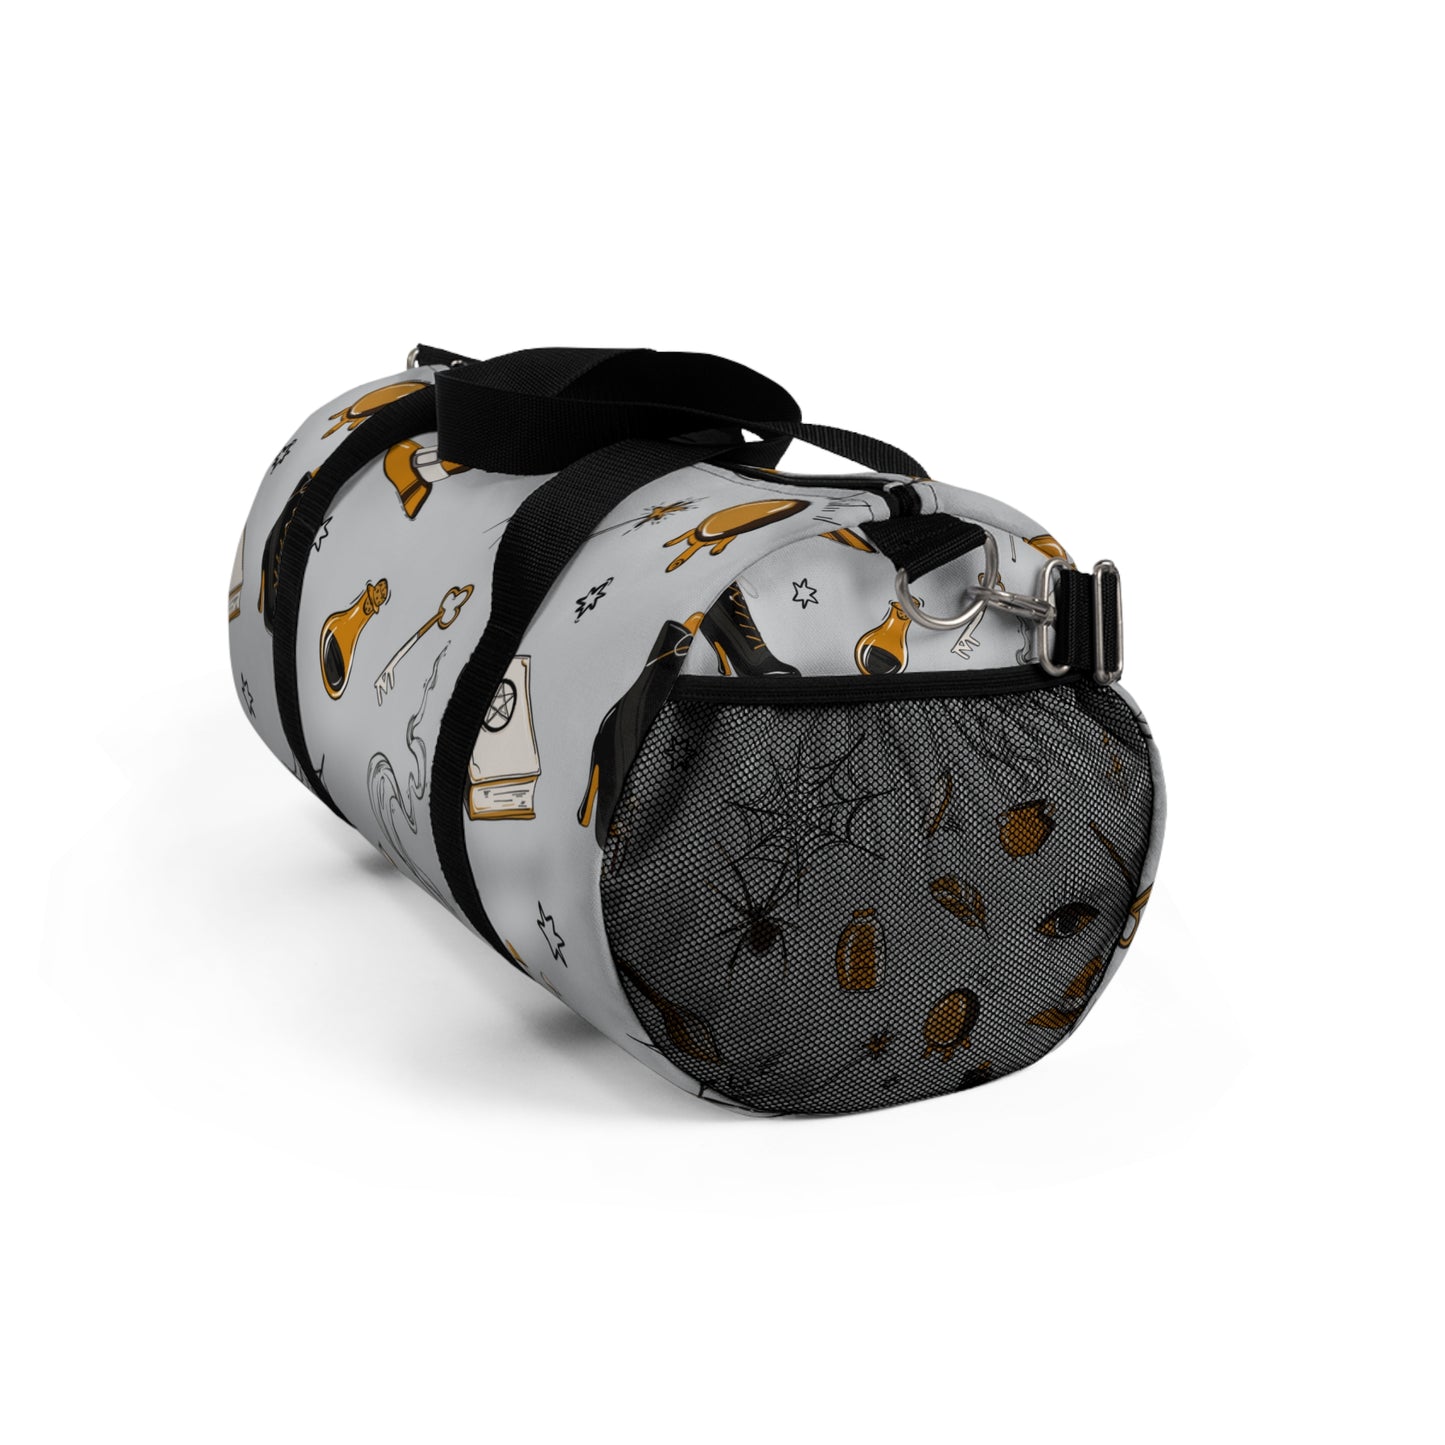 Summon the Witches Duffel Bag